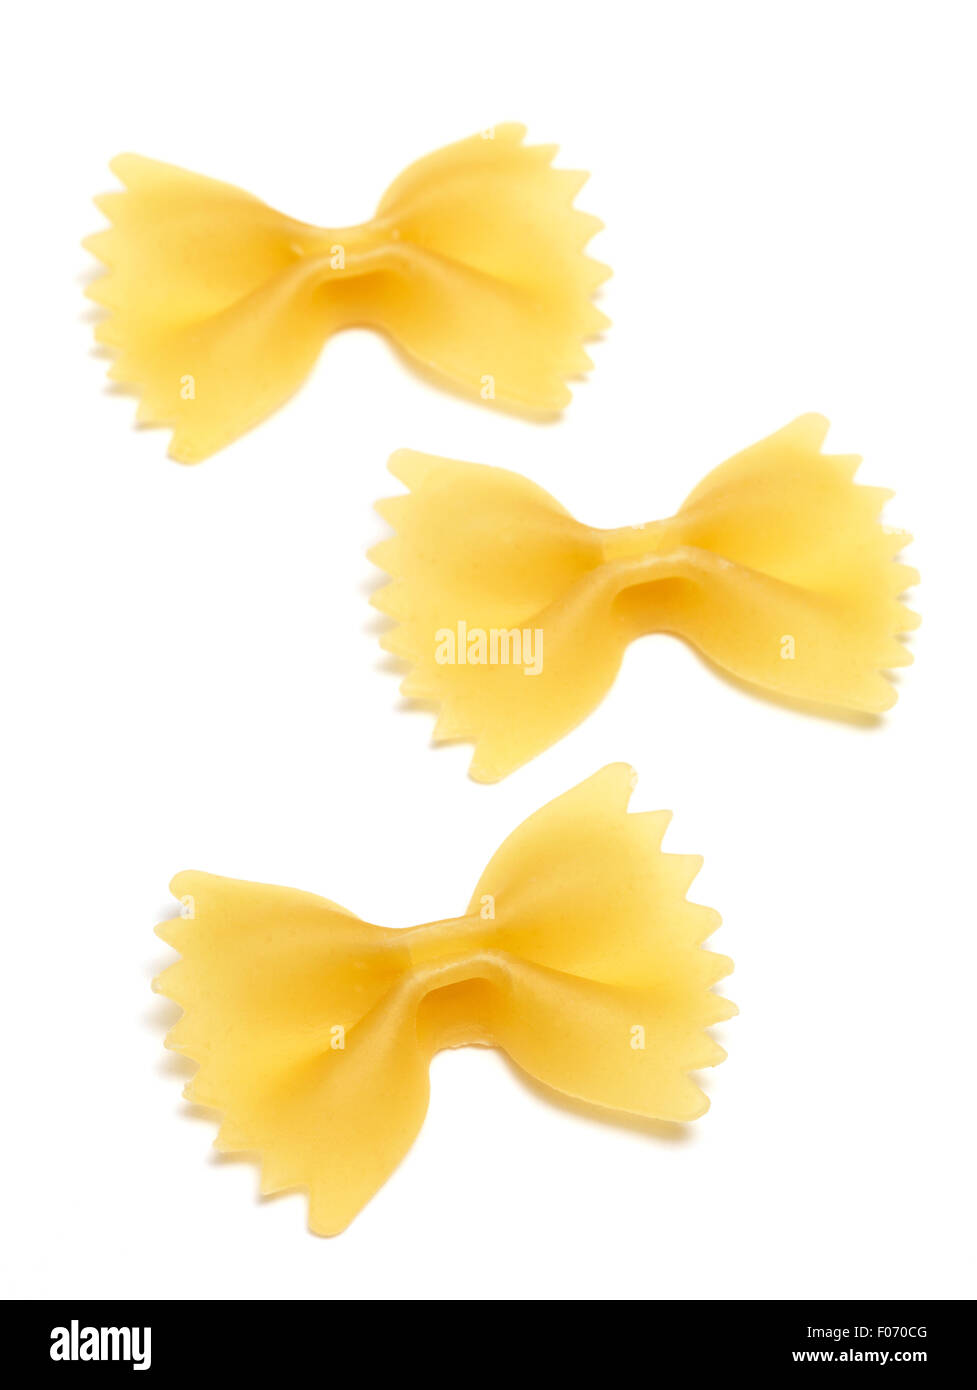 Isolated Pasta on a white background Stock Photo